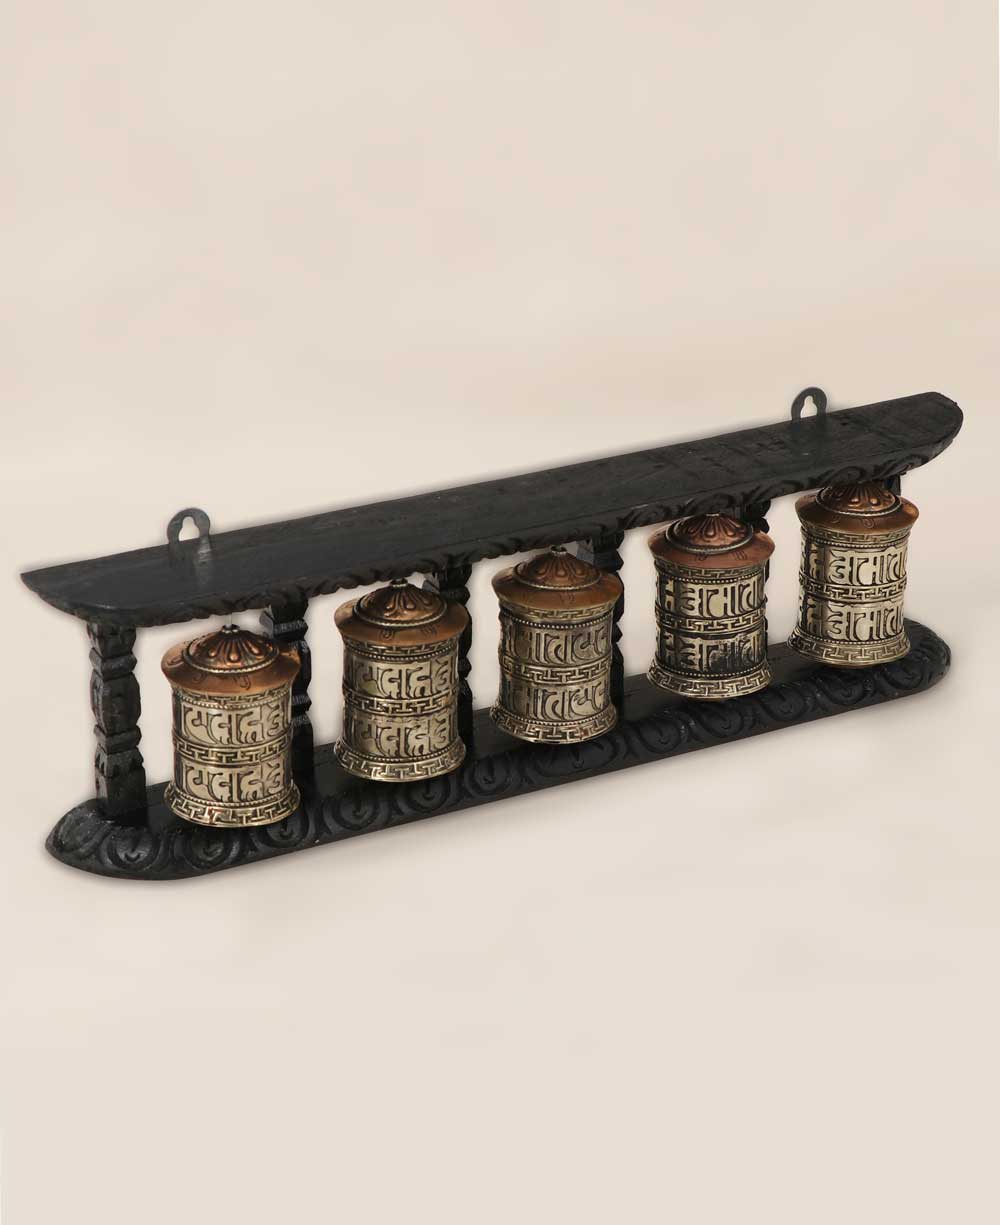 Five-in-One Hanging Metal and Wood Prayer Wheel - Religious Altars